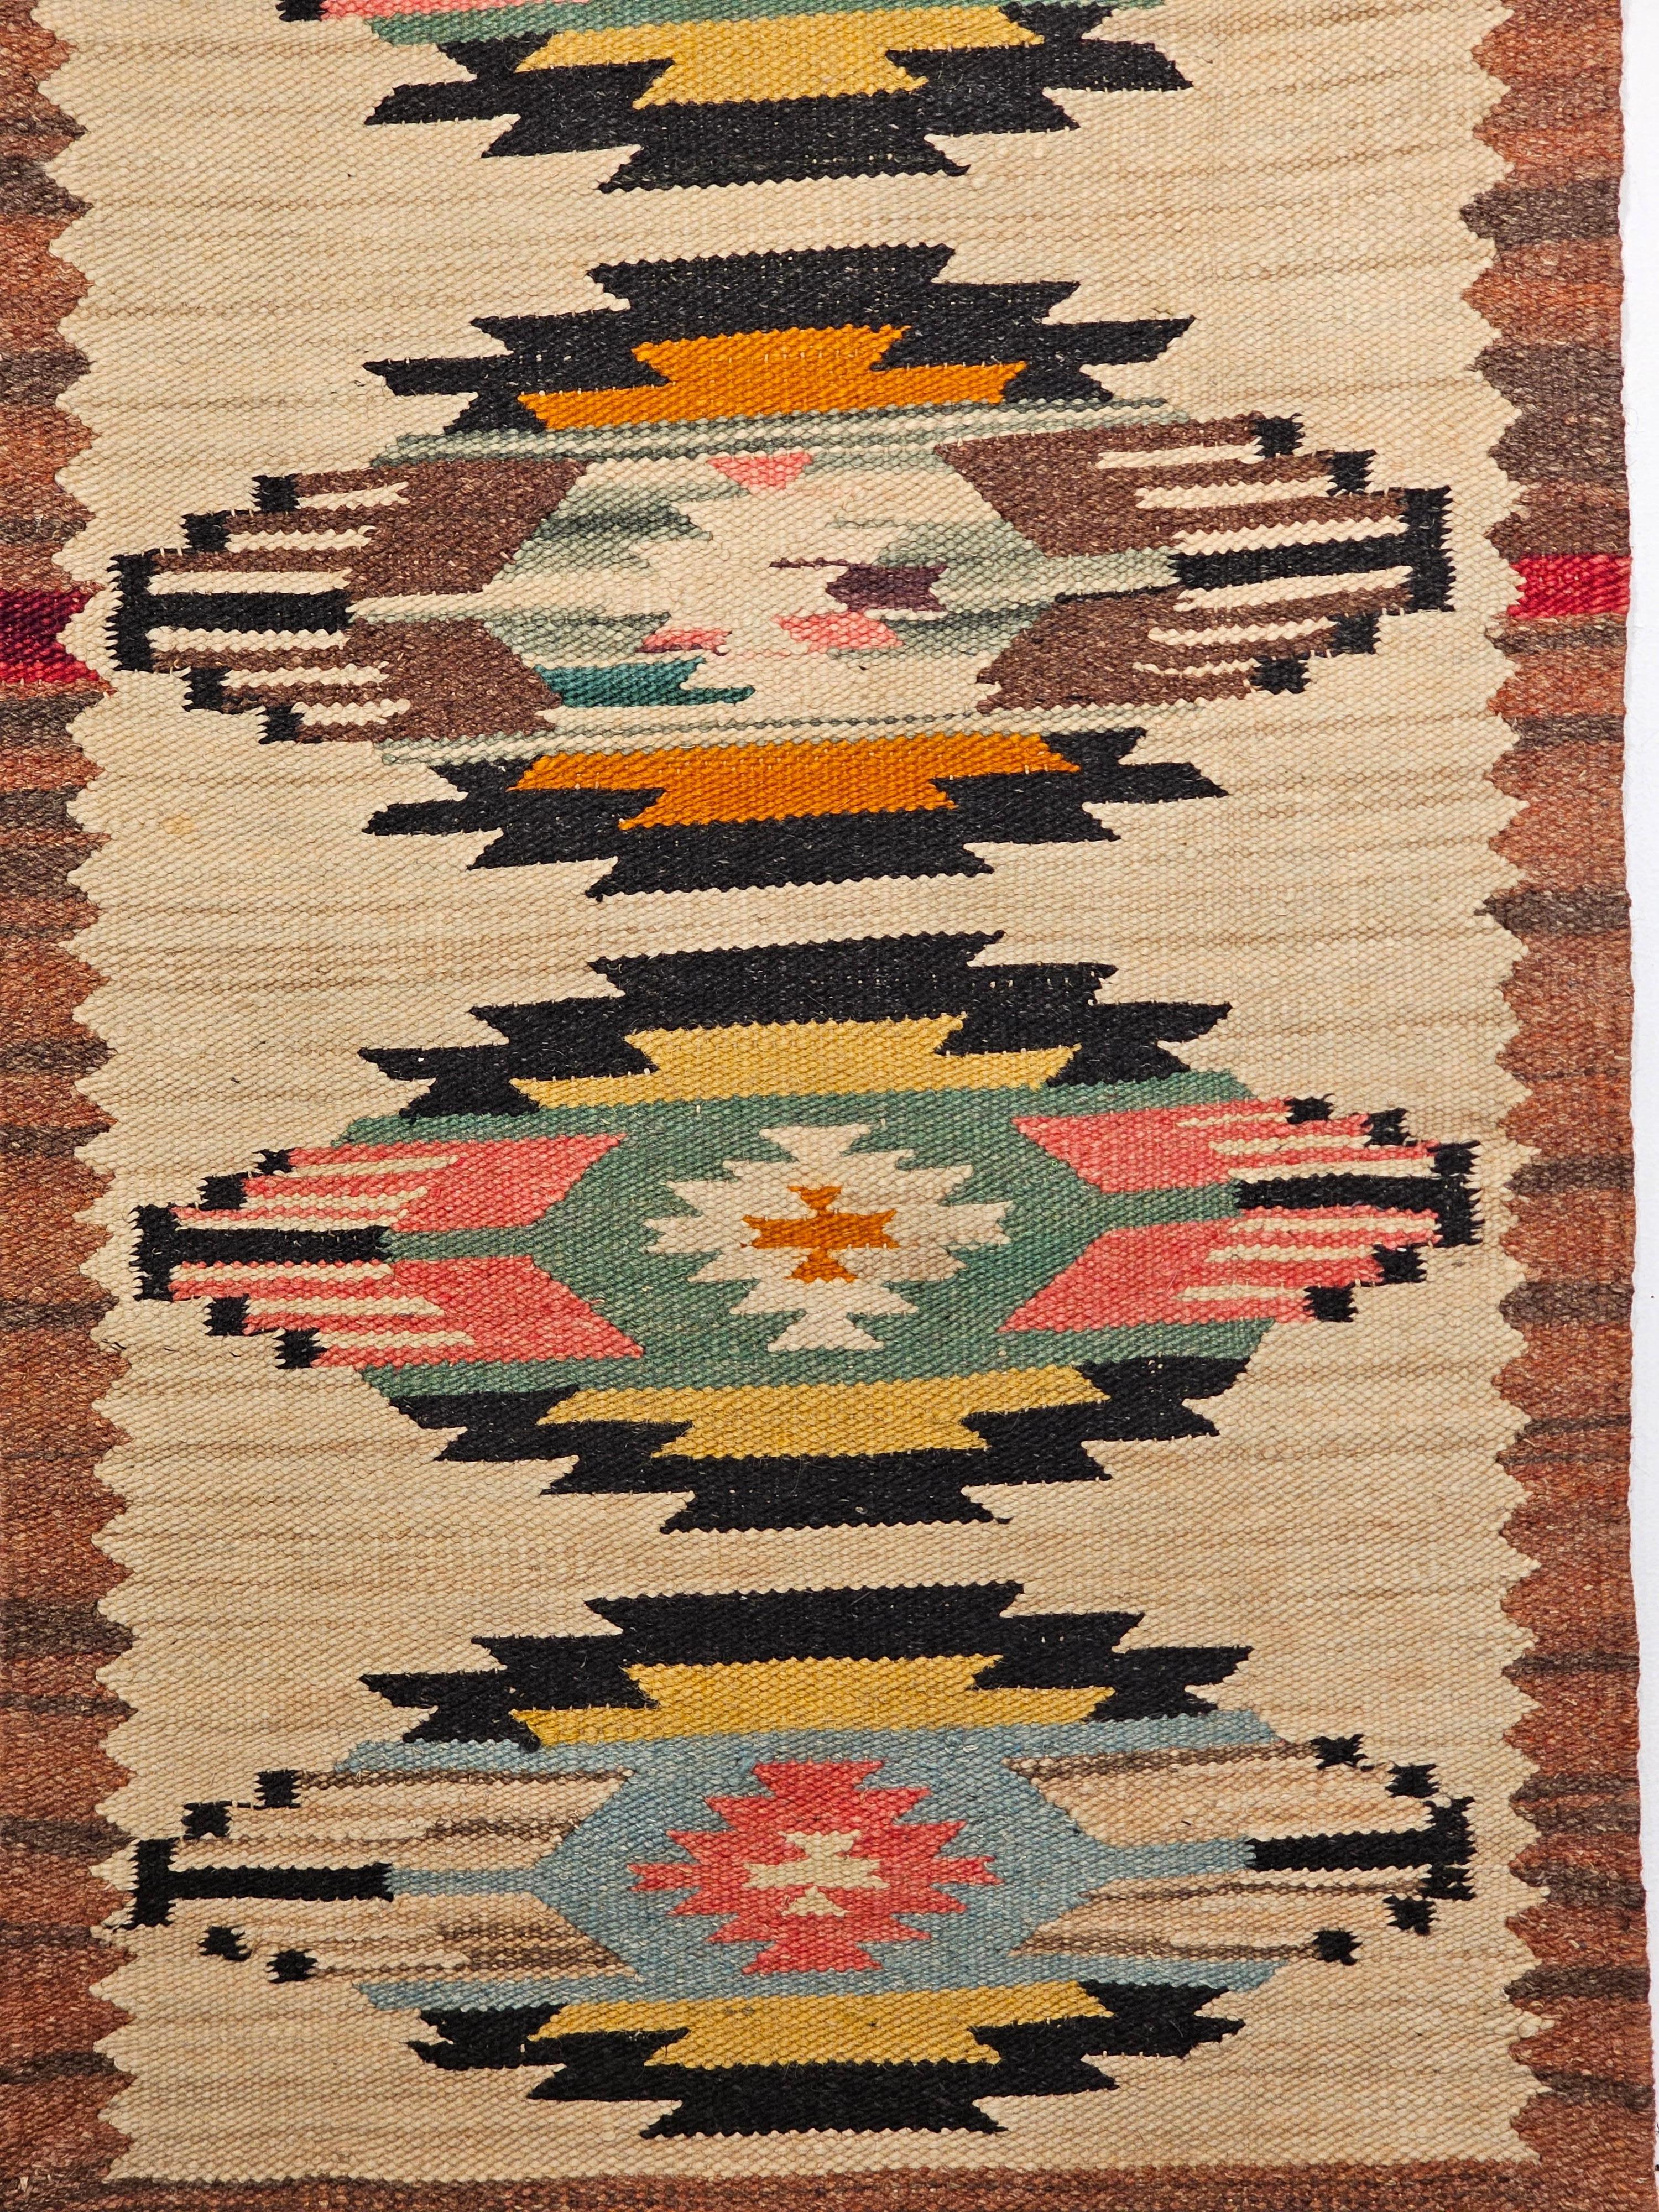 Beautiful and colorful vintage native American Navajo rug from the SW United States from the mid 1900s. The Navajo rug has a diamond form design consisting of five large connected diamonds. Beautiful natural color tones include green, turquoise